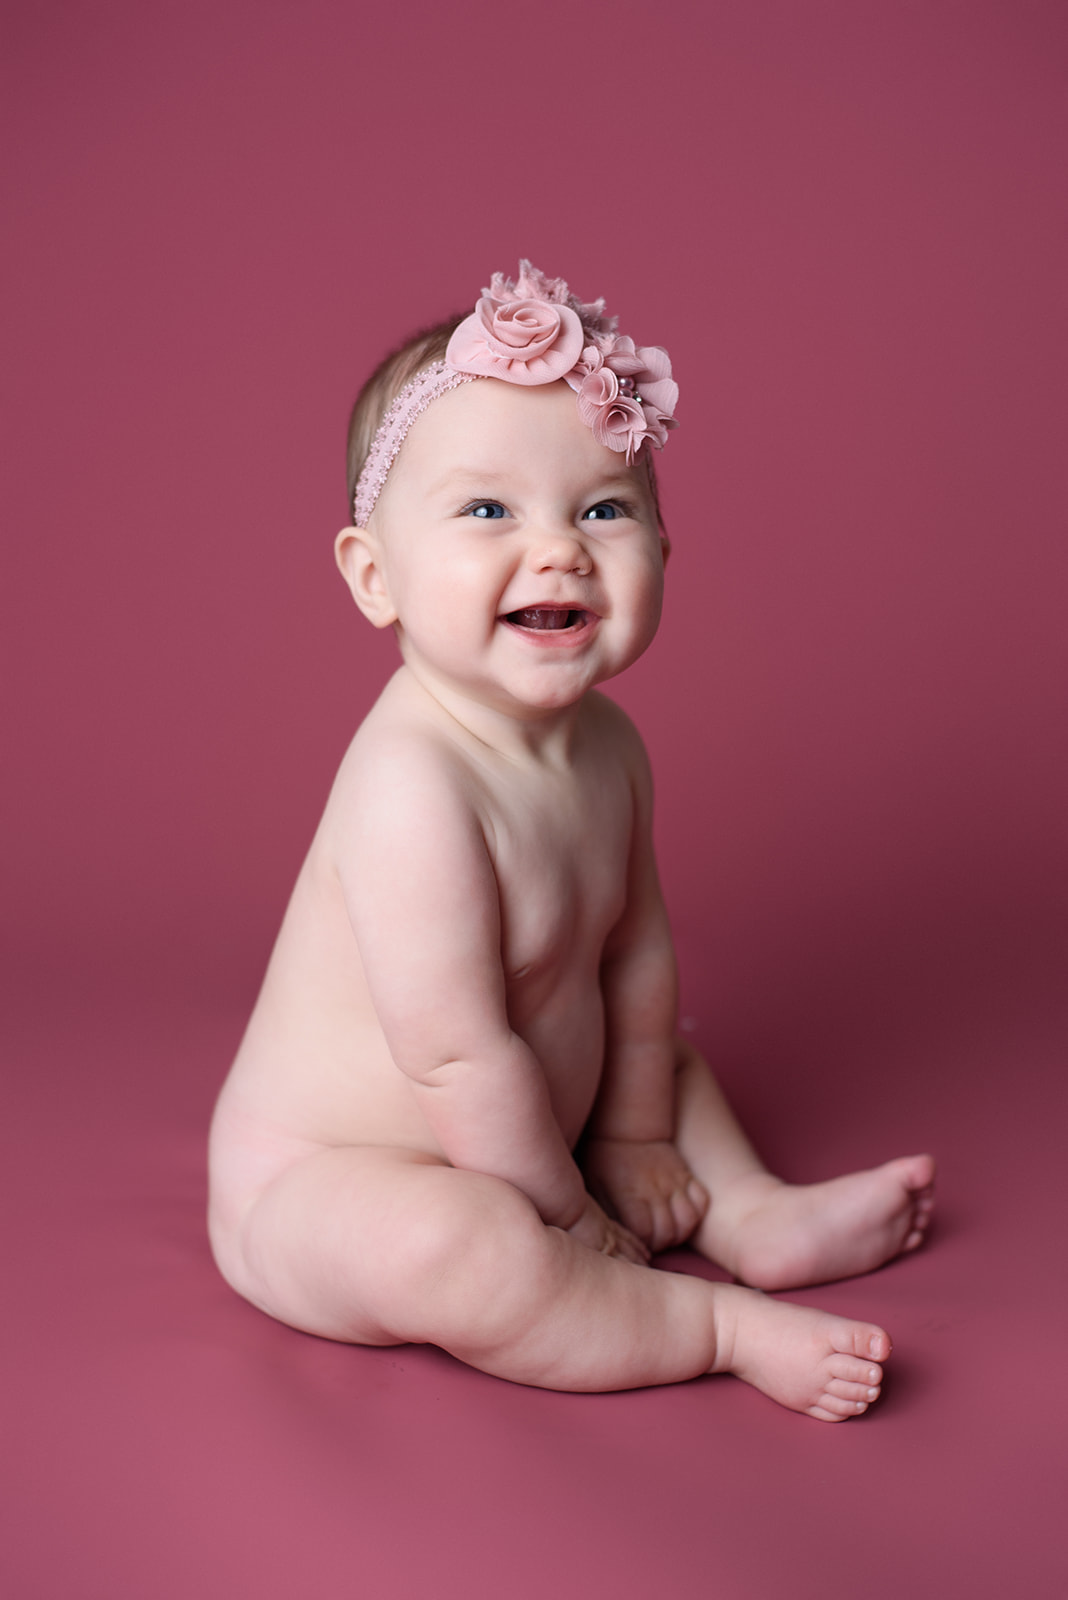 A baby girl giggles during her 6 month milestone photography session with Rachel Mummert Photography